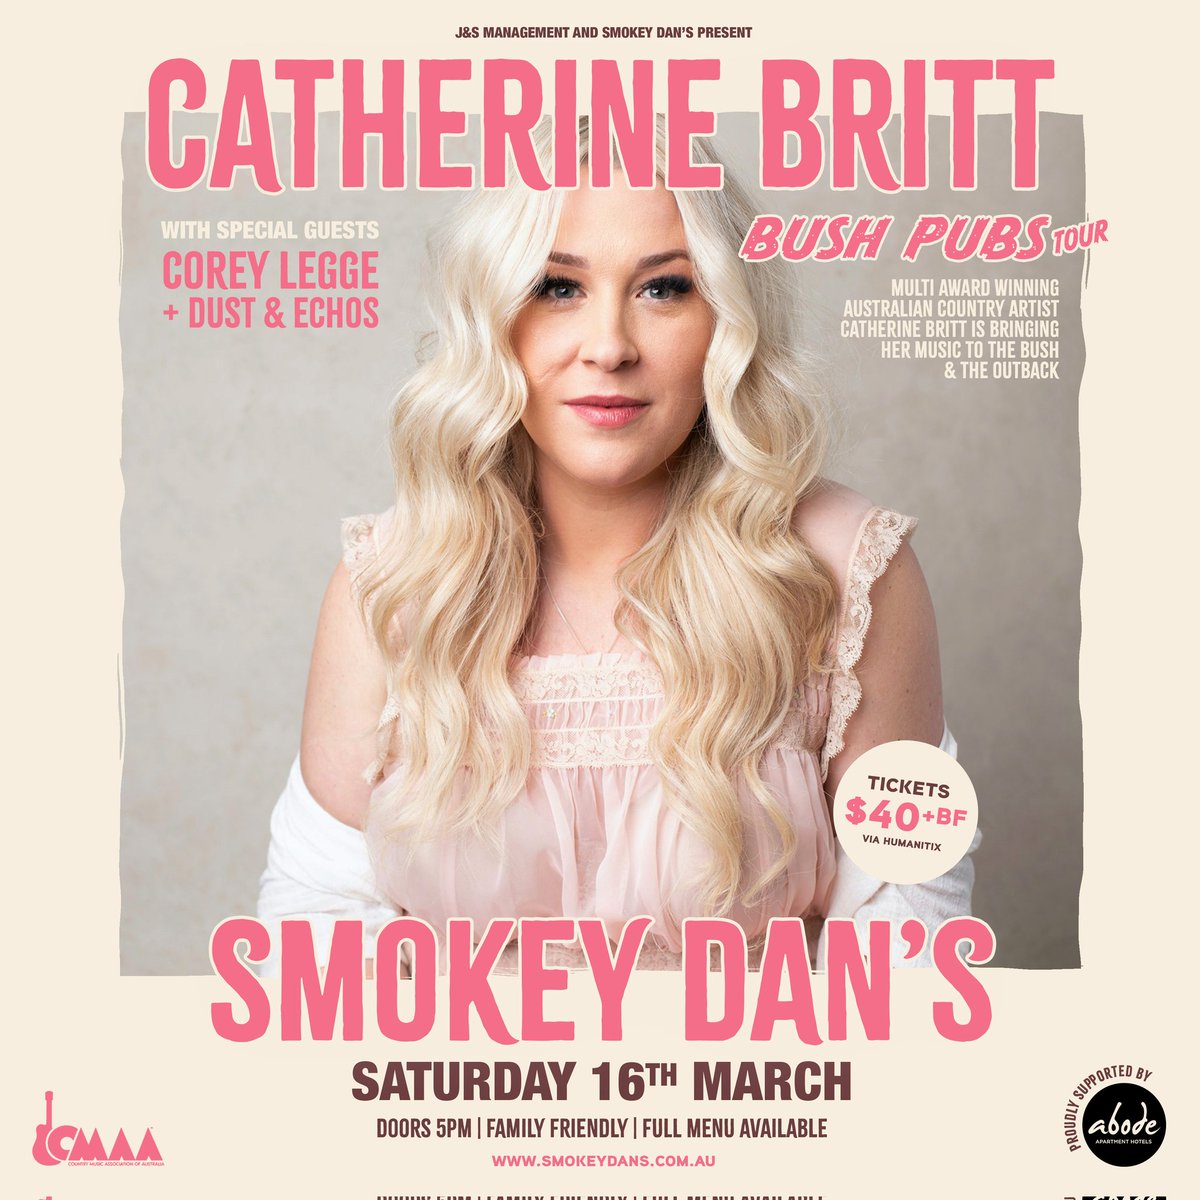 I'm looking forward to opening the show for @catherinebritt at Smokey Dan's in Tomakin alongside Dust and Echos on Saturday 16th March! 🤠 Buy Tickets: events.humanitix.com/catherine-brit… #catherinebritt #smokeydans #tomakin #country #altcountry #americana